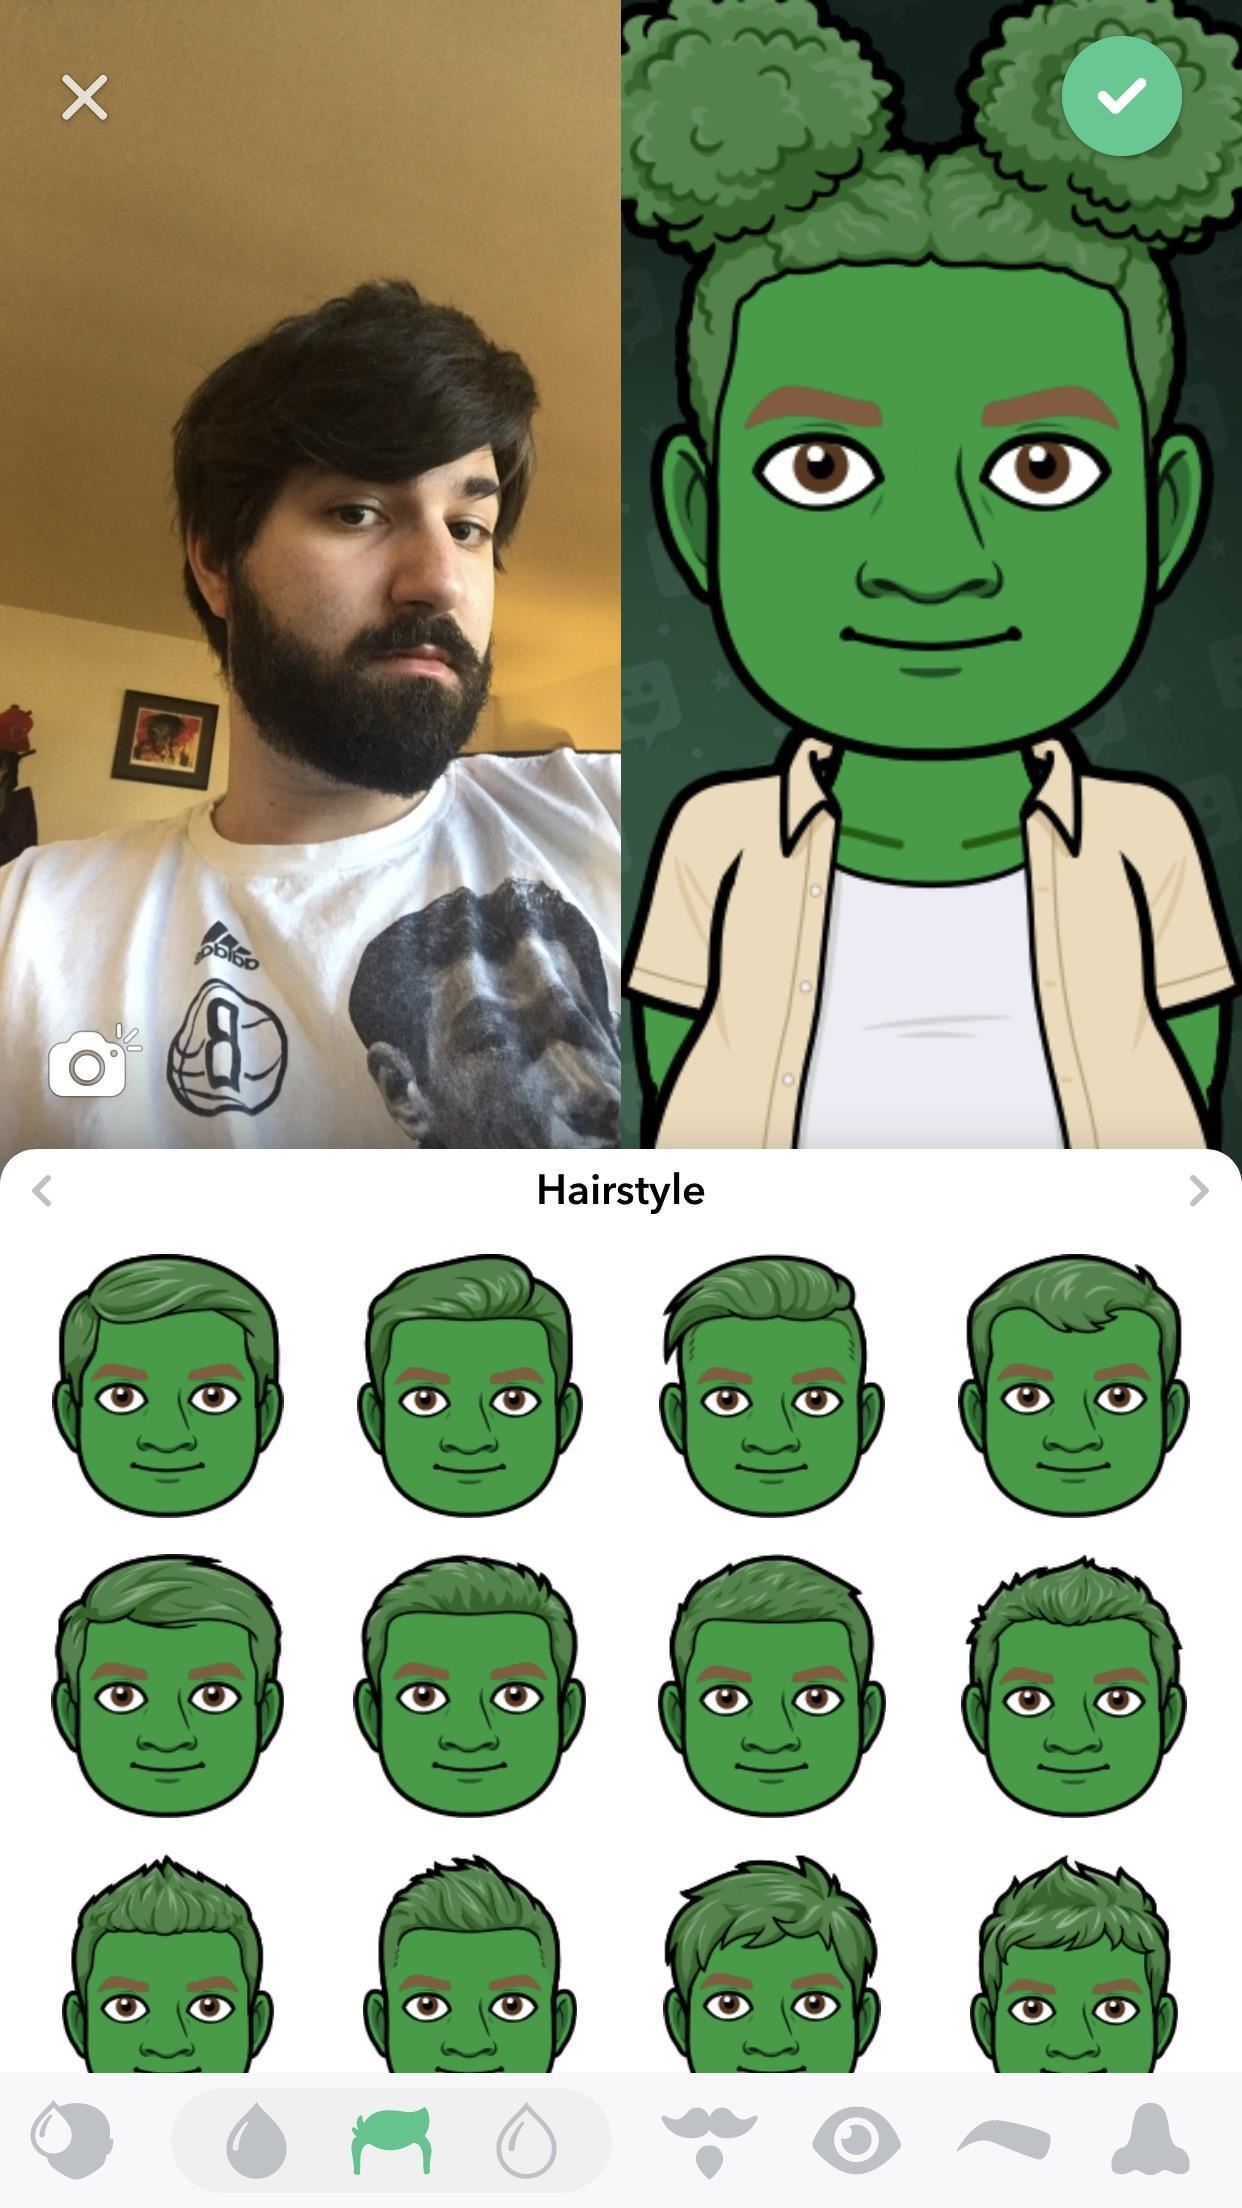 Snapchat 101: How to Use Your Selfies to Create a Bitmoji Deluxe